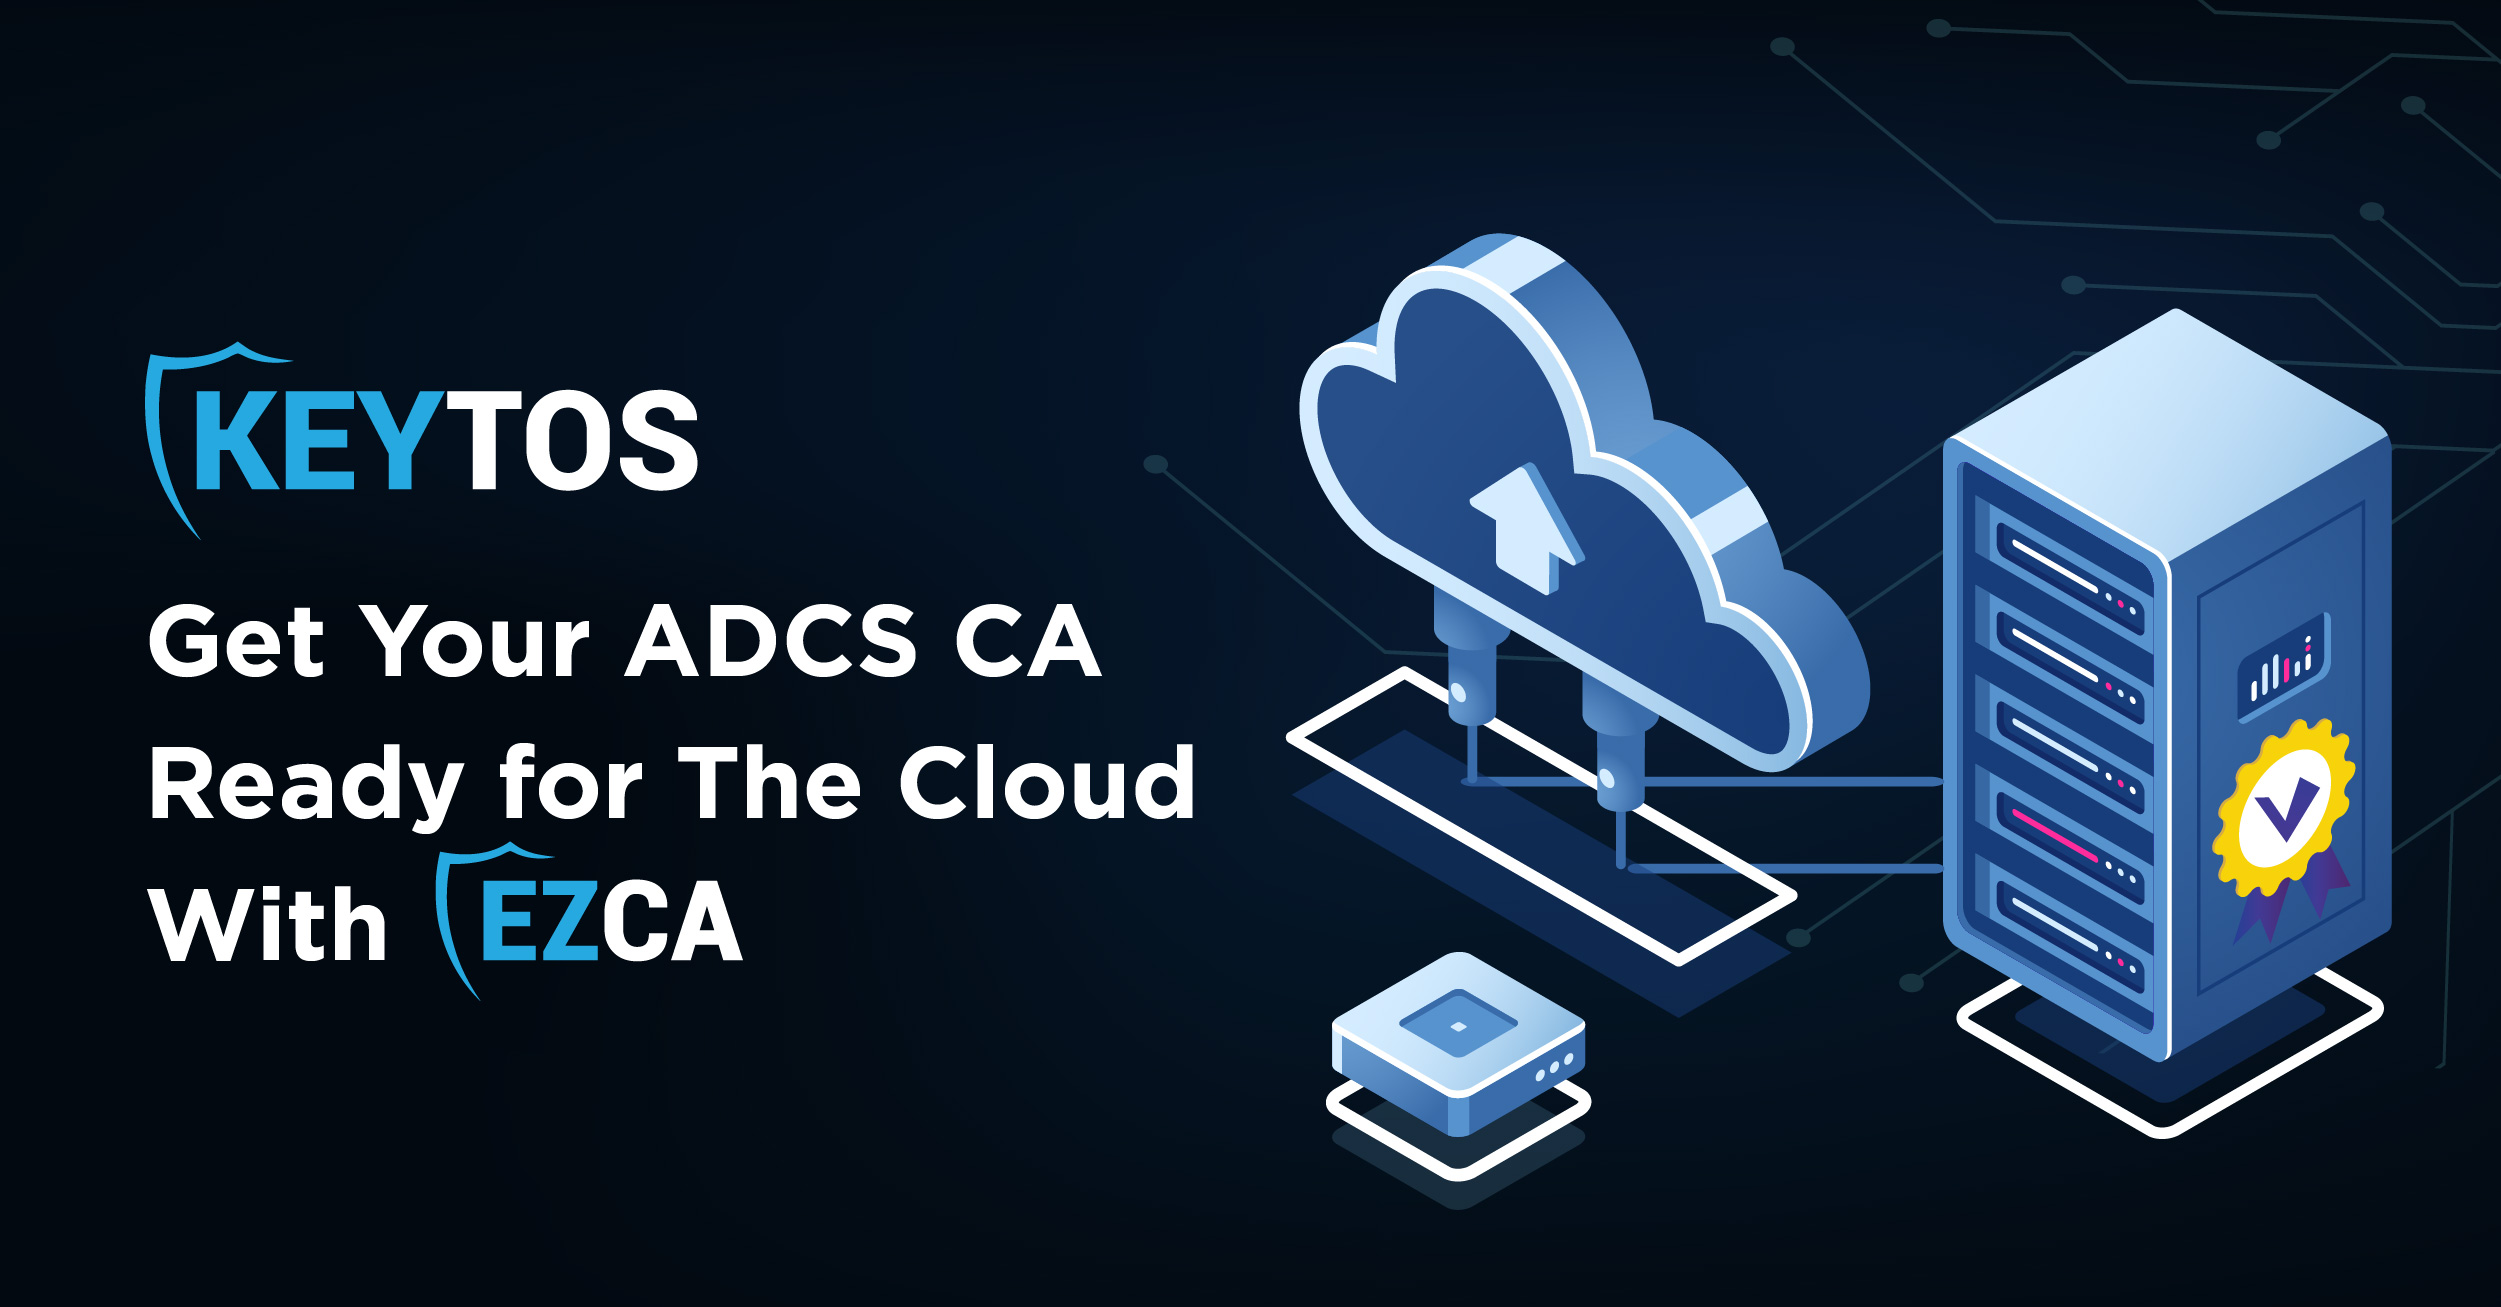 Get Your ADCS CA Ready for the Cloud with EZCA